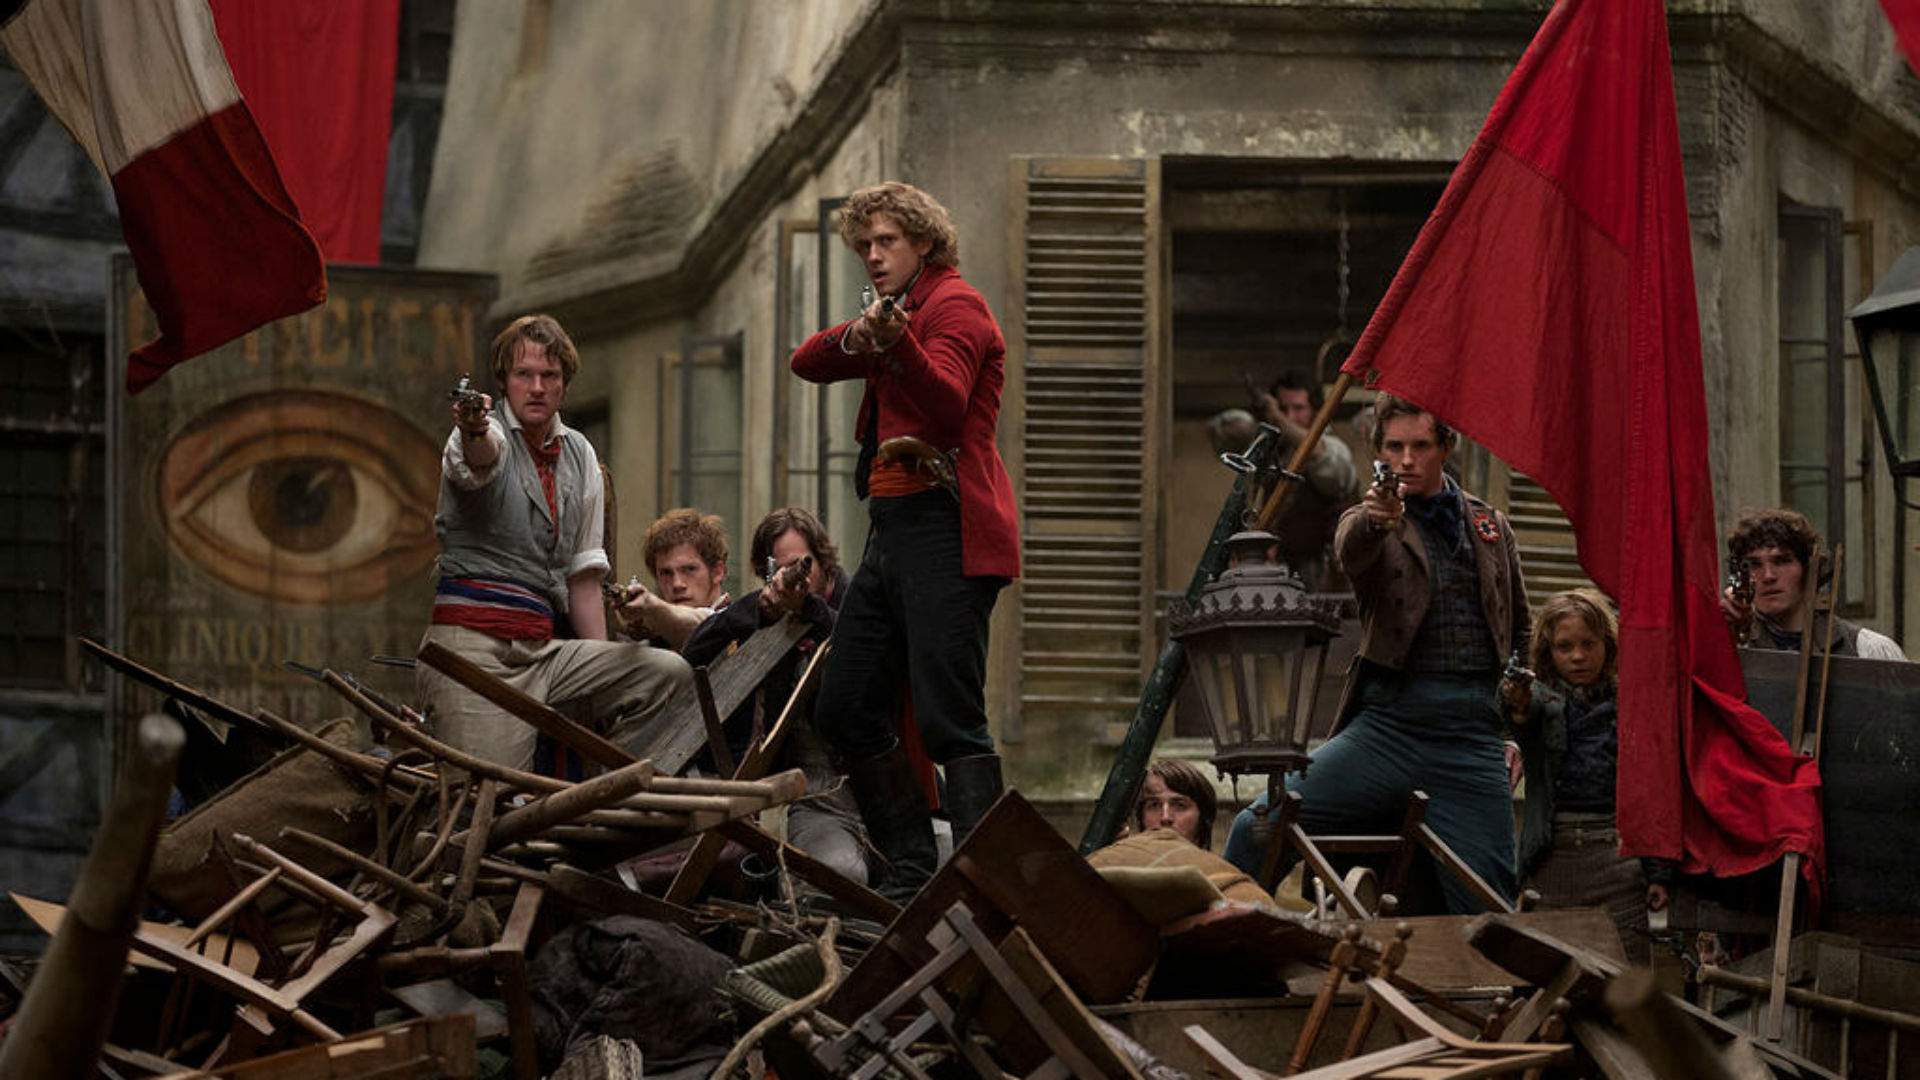 This Immersive Screening of 'Les Miserables' Will Transport You to 19th Century France